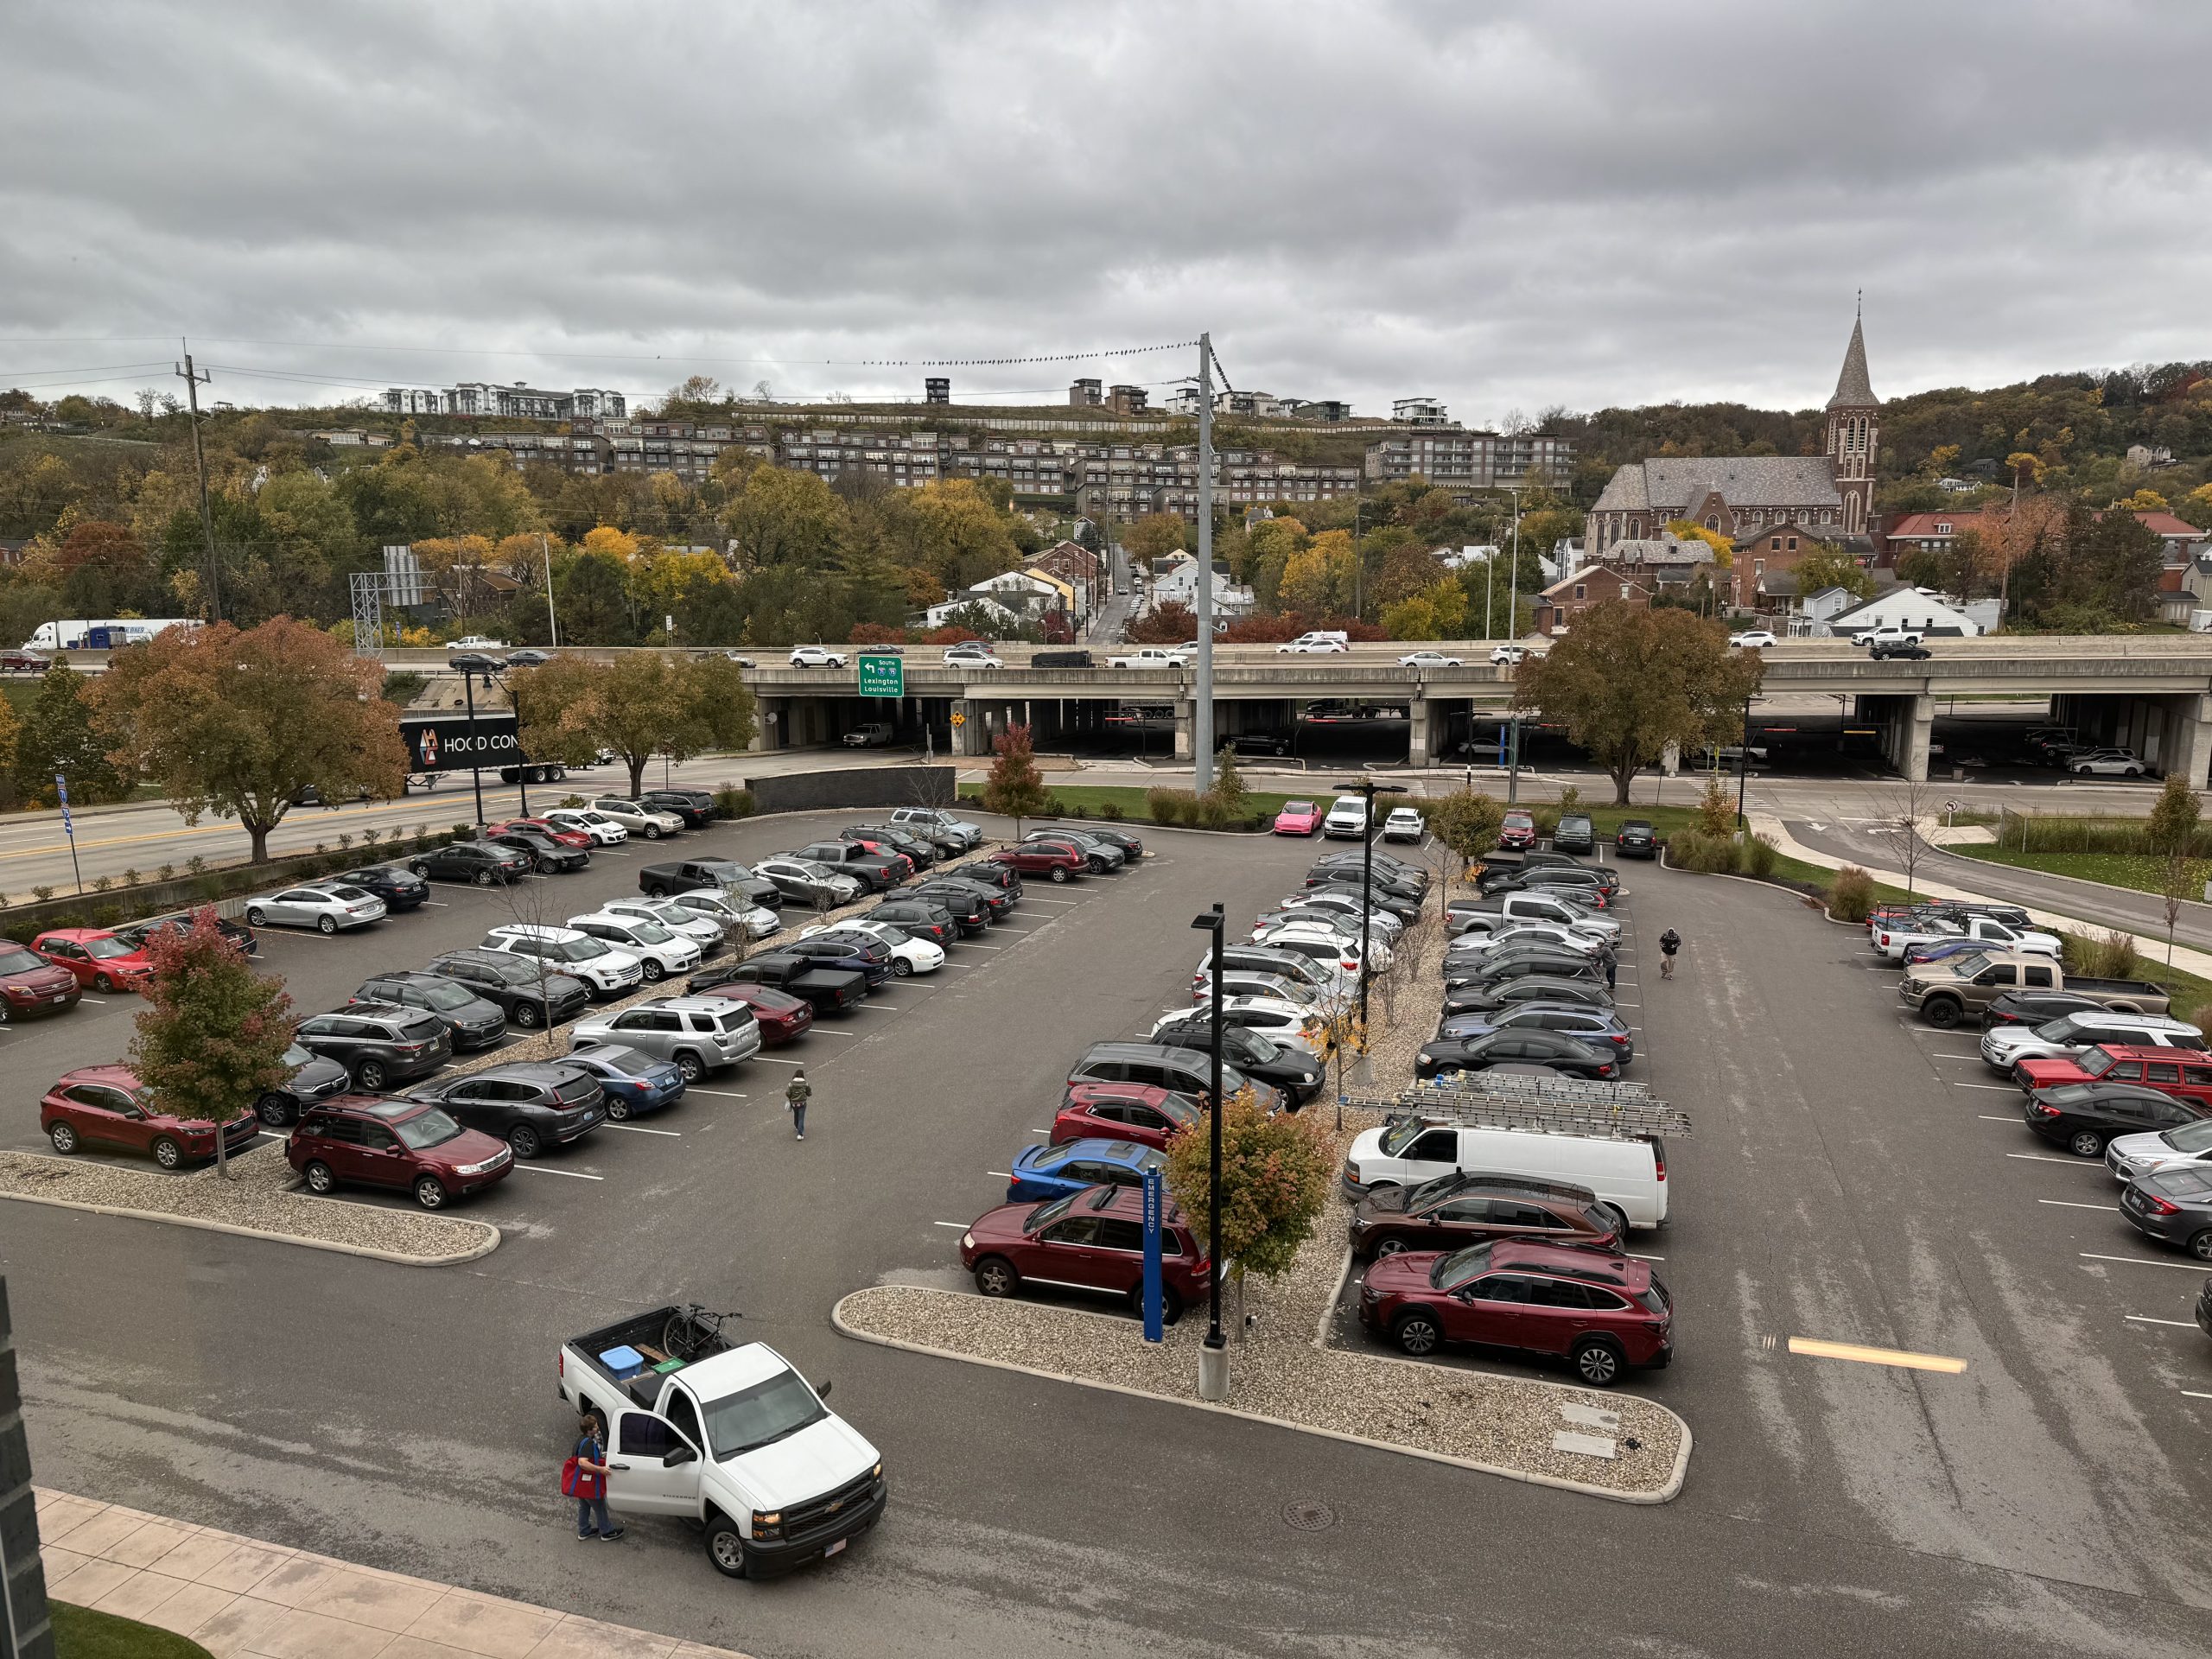 Parking Garage Will Benefit Office Workers, Covington’s Economic Opportunity… and Save Money